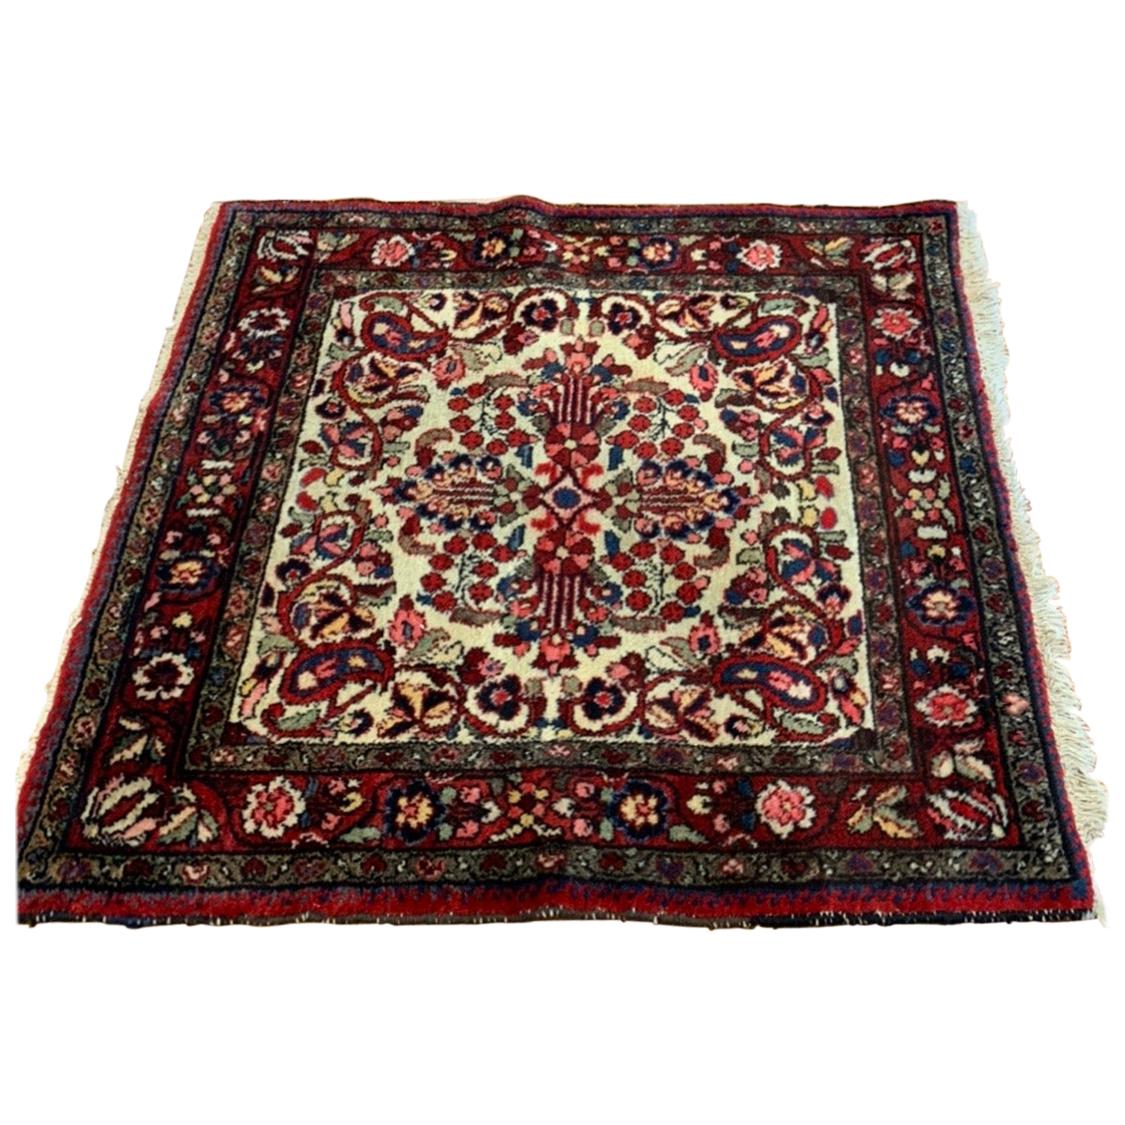 Antique Red Ivory Navy Blue Square Persian Hamedan Small Area Rug For Sale